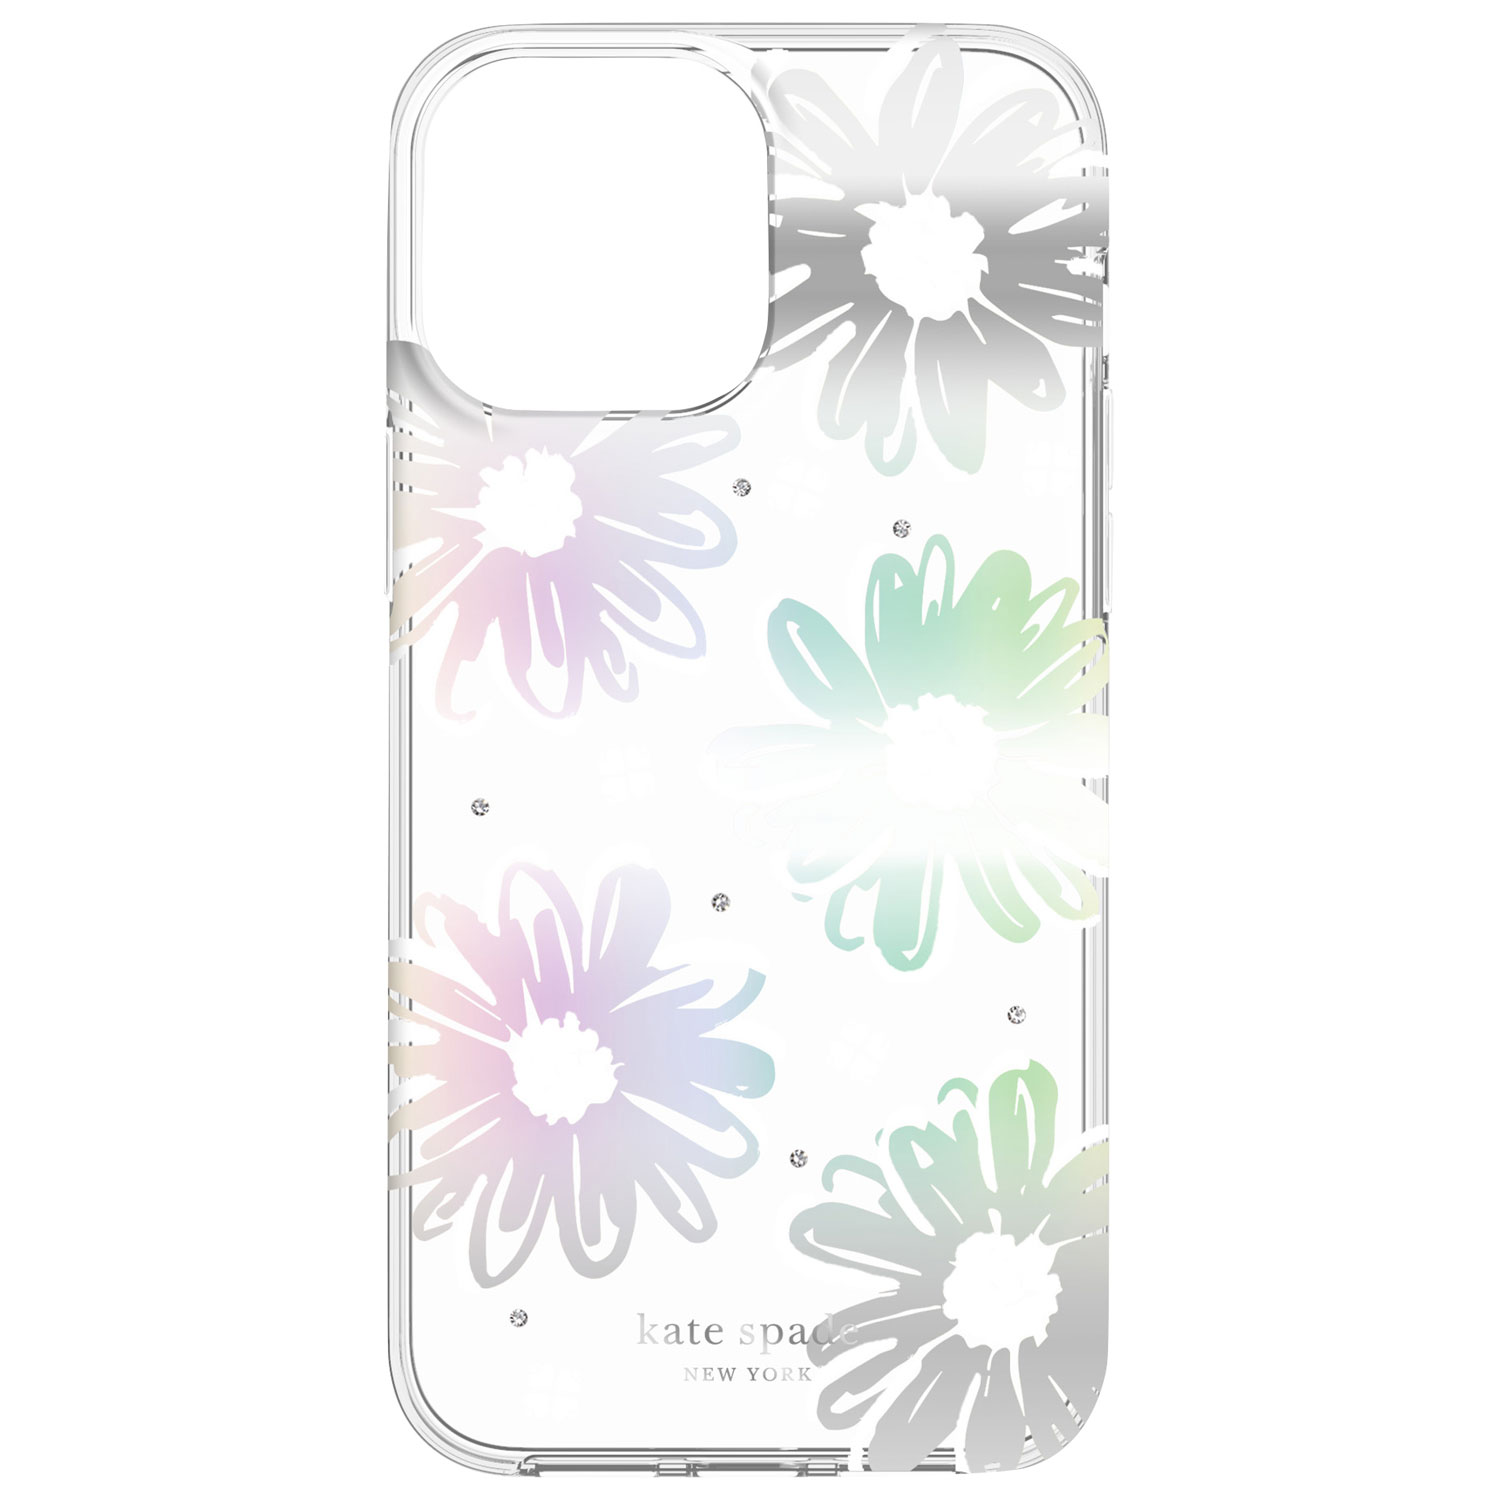 kate spade new york Fitted Hard Shell Case for iPhone 13 Pro Max - Daisy